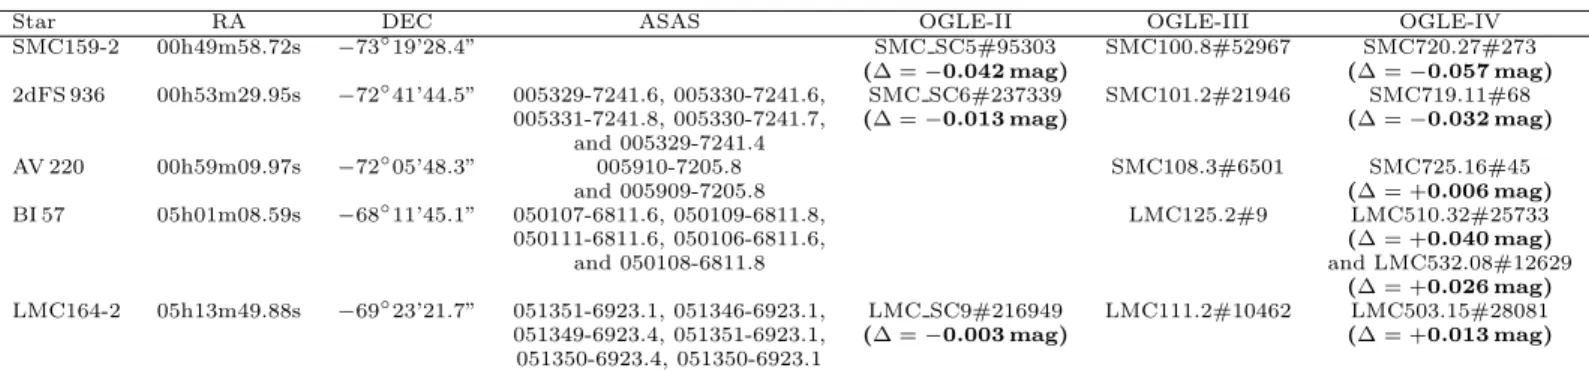 Table 1. List of our targets, with their position and their star and ﬁeld IDs in ASAS and OGLE databases